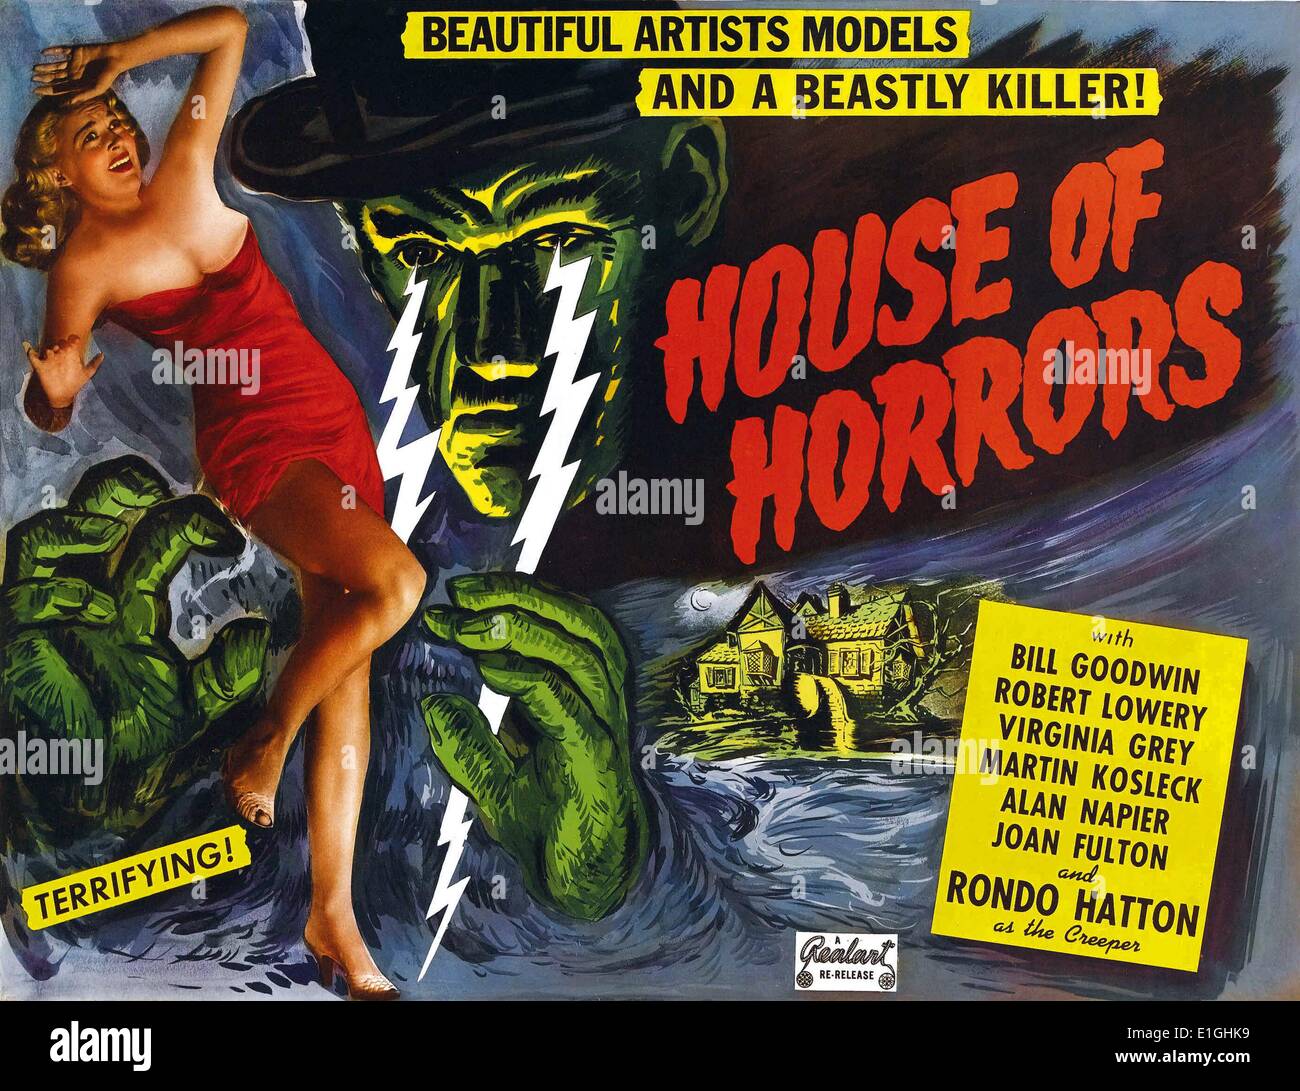 House of Horrors starring Bill Goodwin a 1965 British horror film. Stock Photo